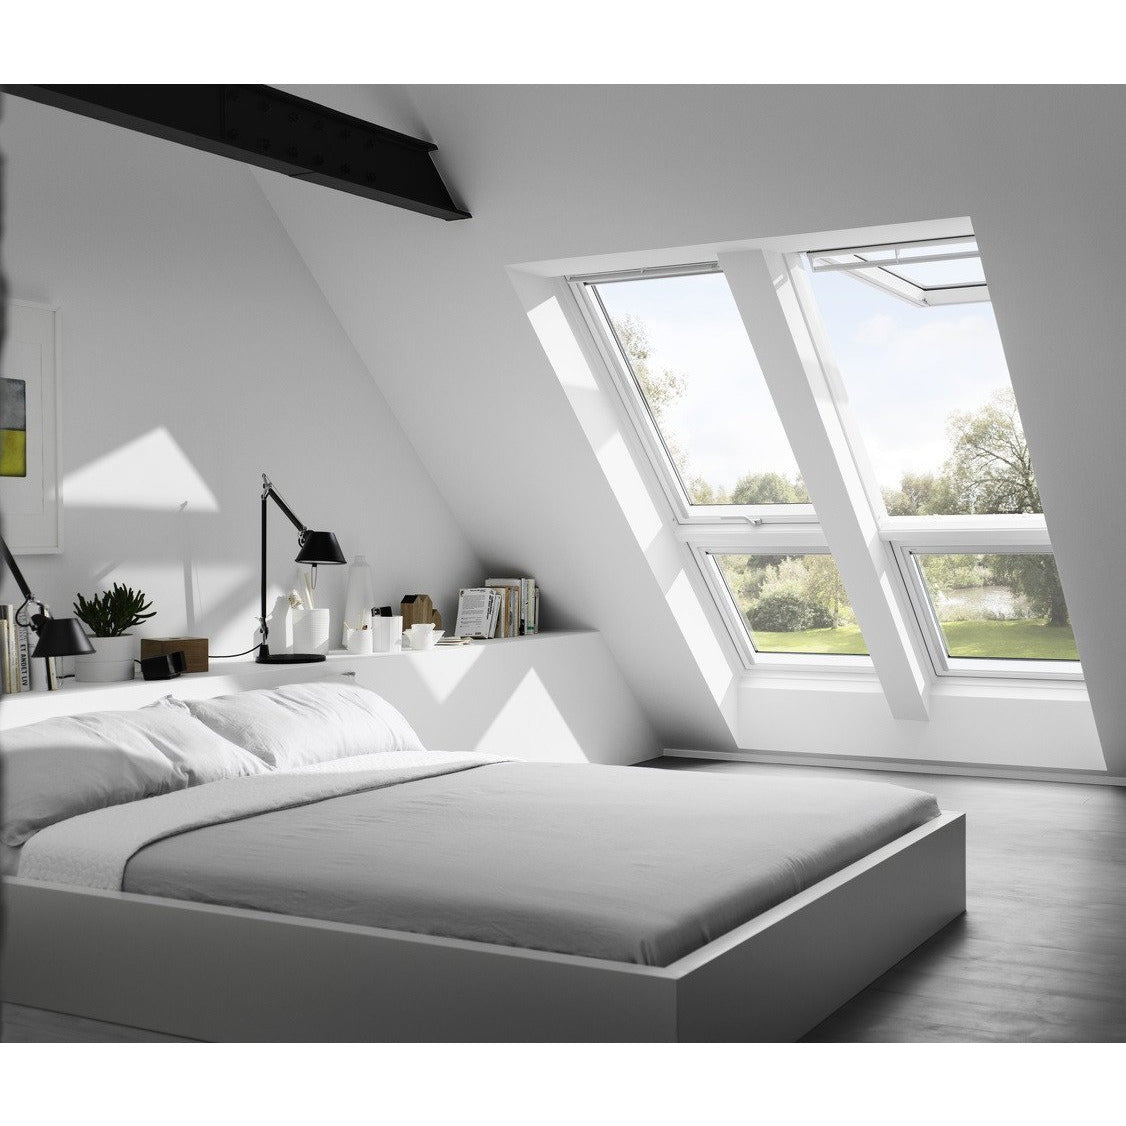 gnier Sympatisere Precipice VELUX GPU MK04 0070 White Top-Hung Window | Roofing Outlet